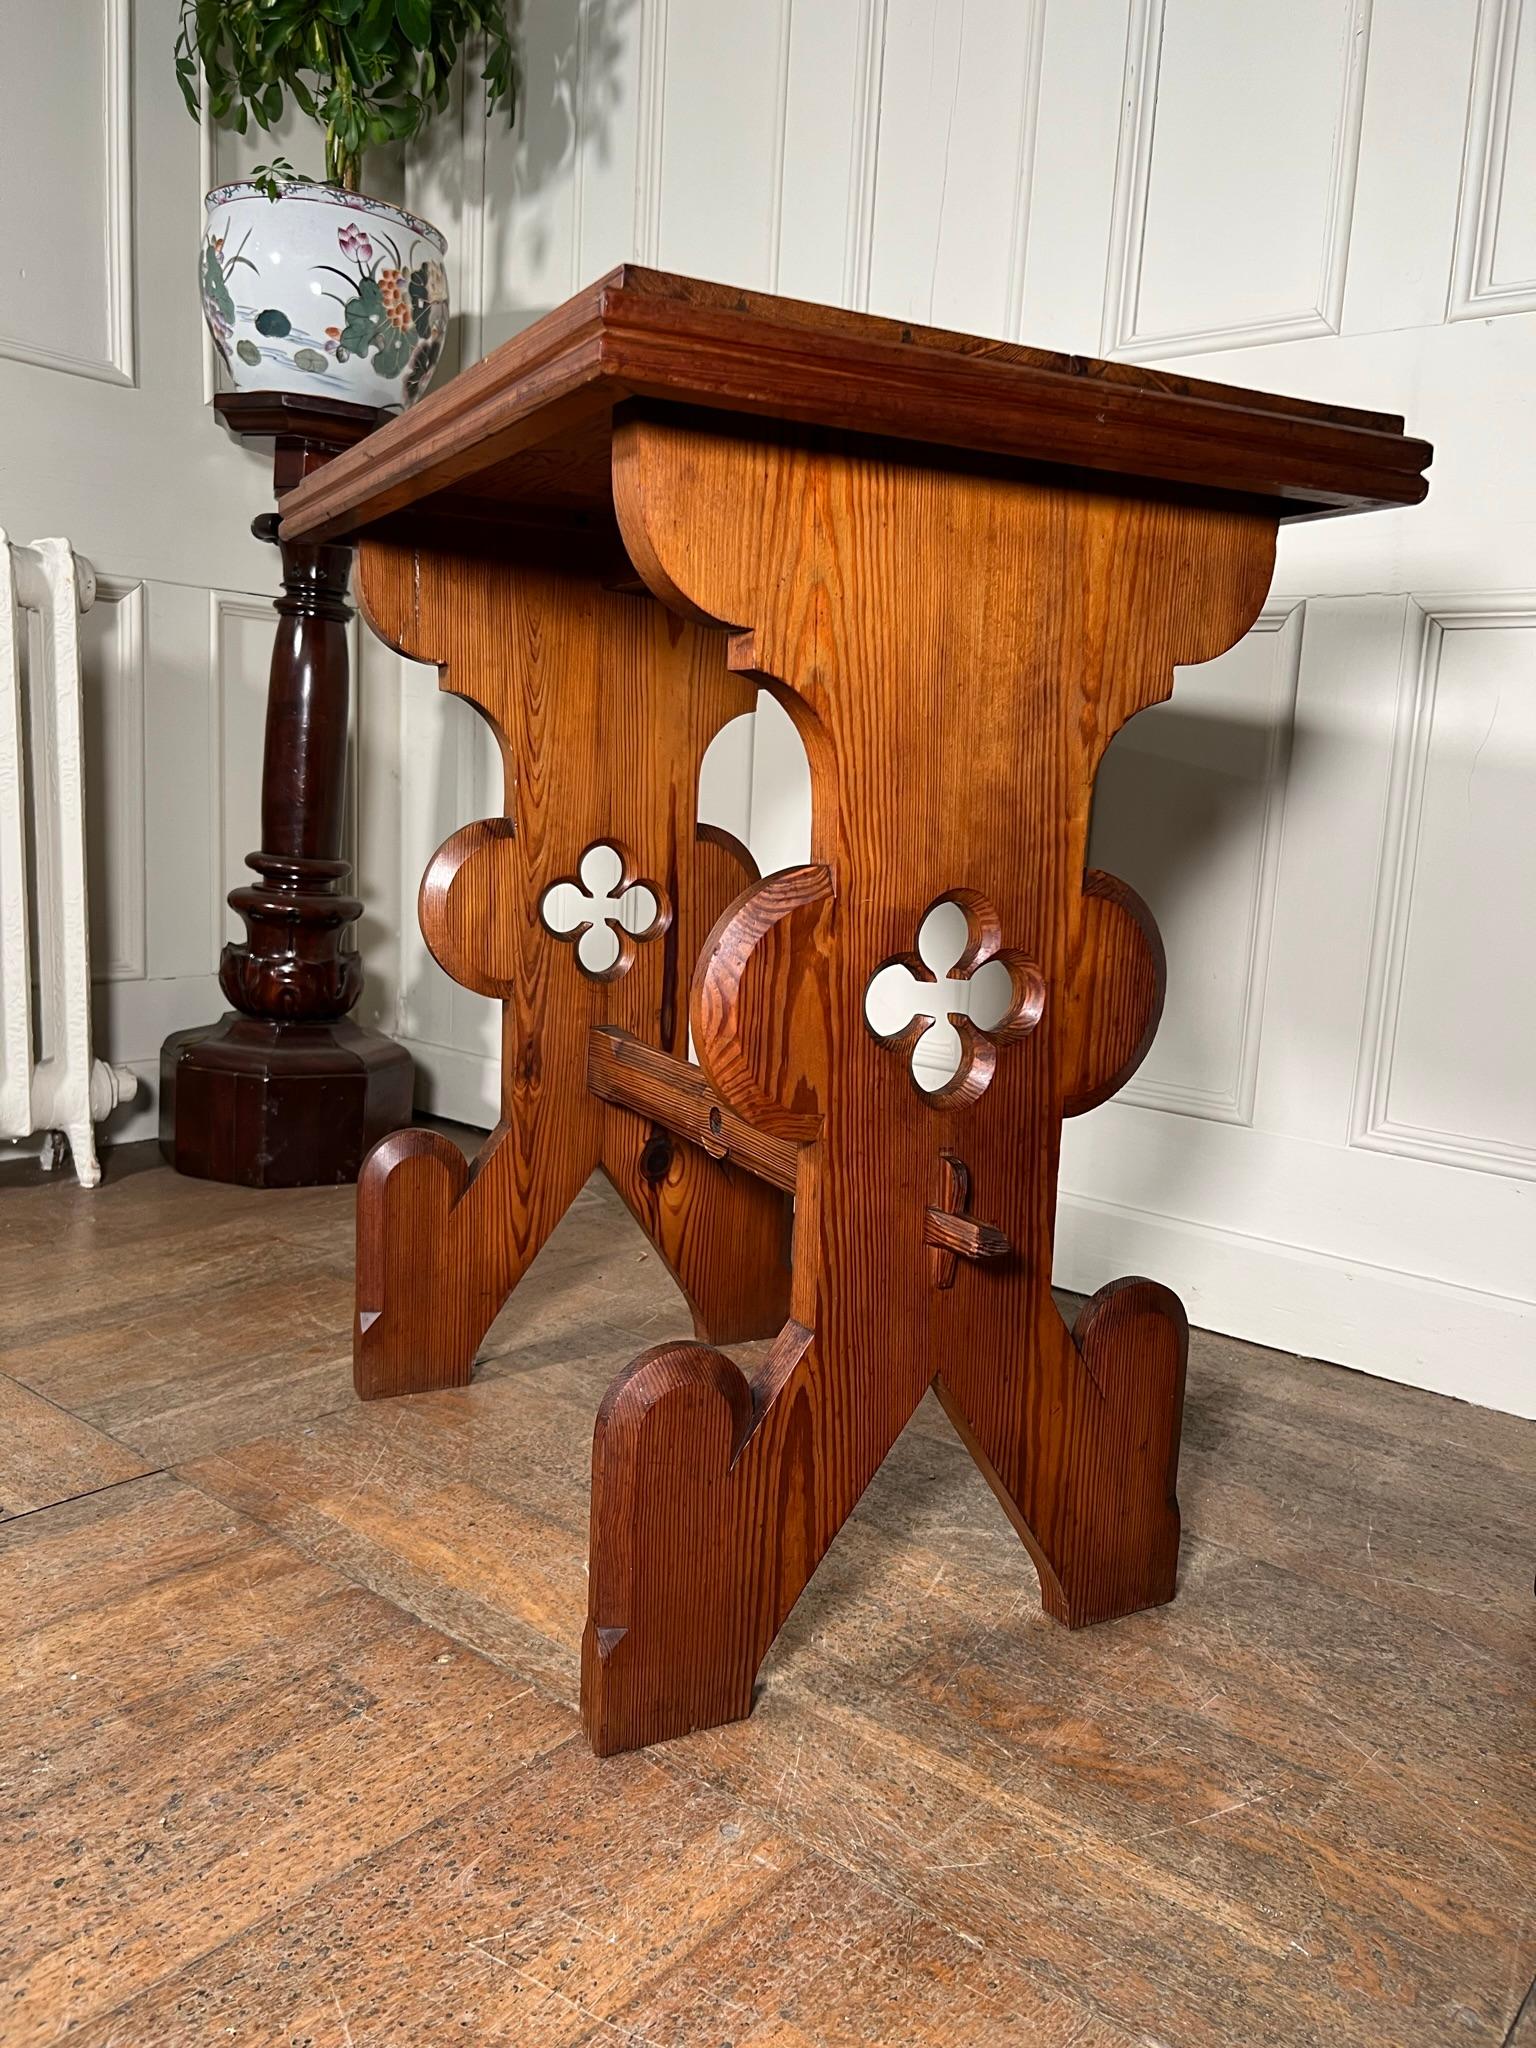 Late 19th century pitch pine Gothic side or occasional table.

Measurements - 81cm h x 76cm w x 55cm d

(measurements are approximate and are taken at the maximum points).